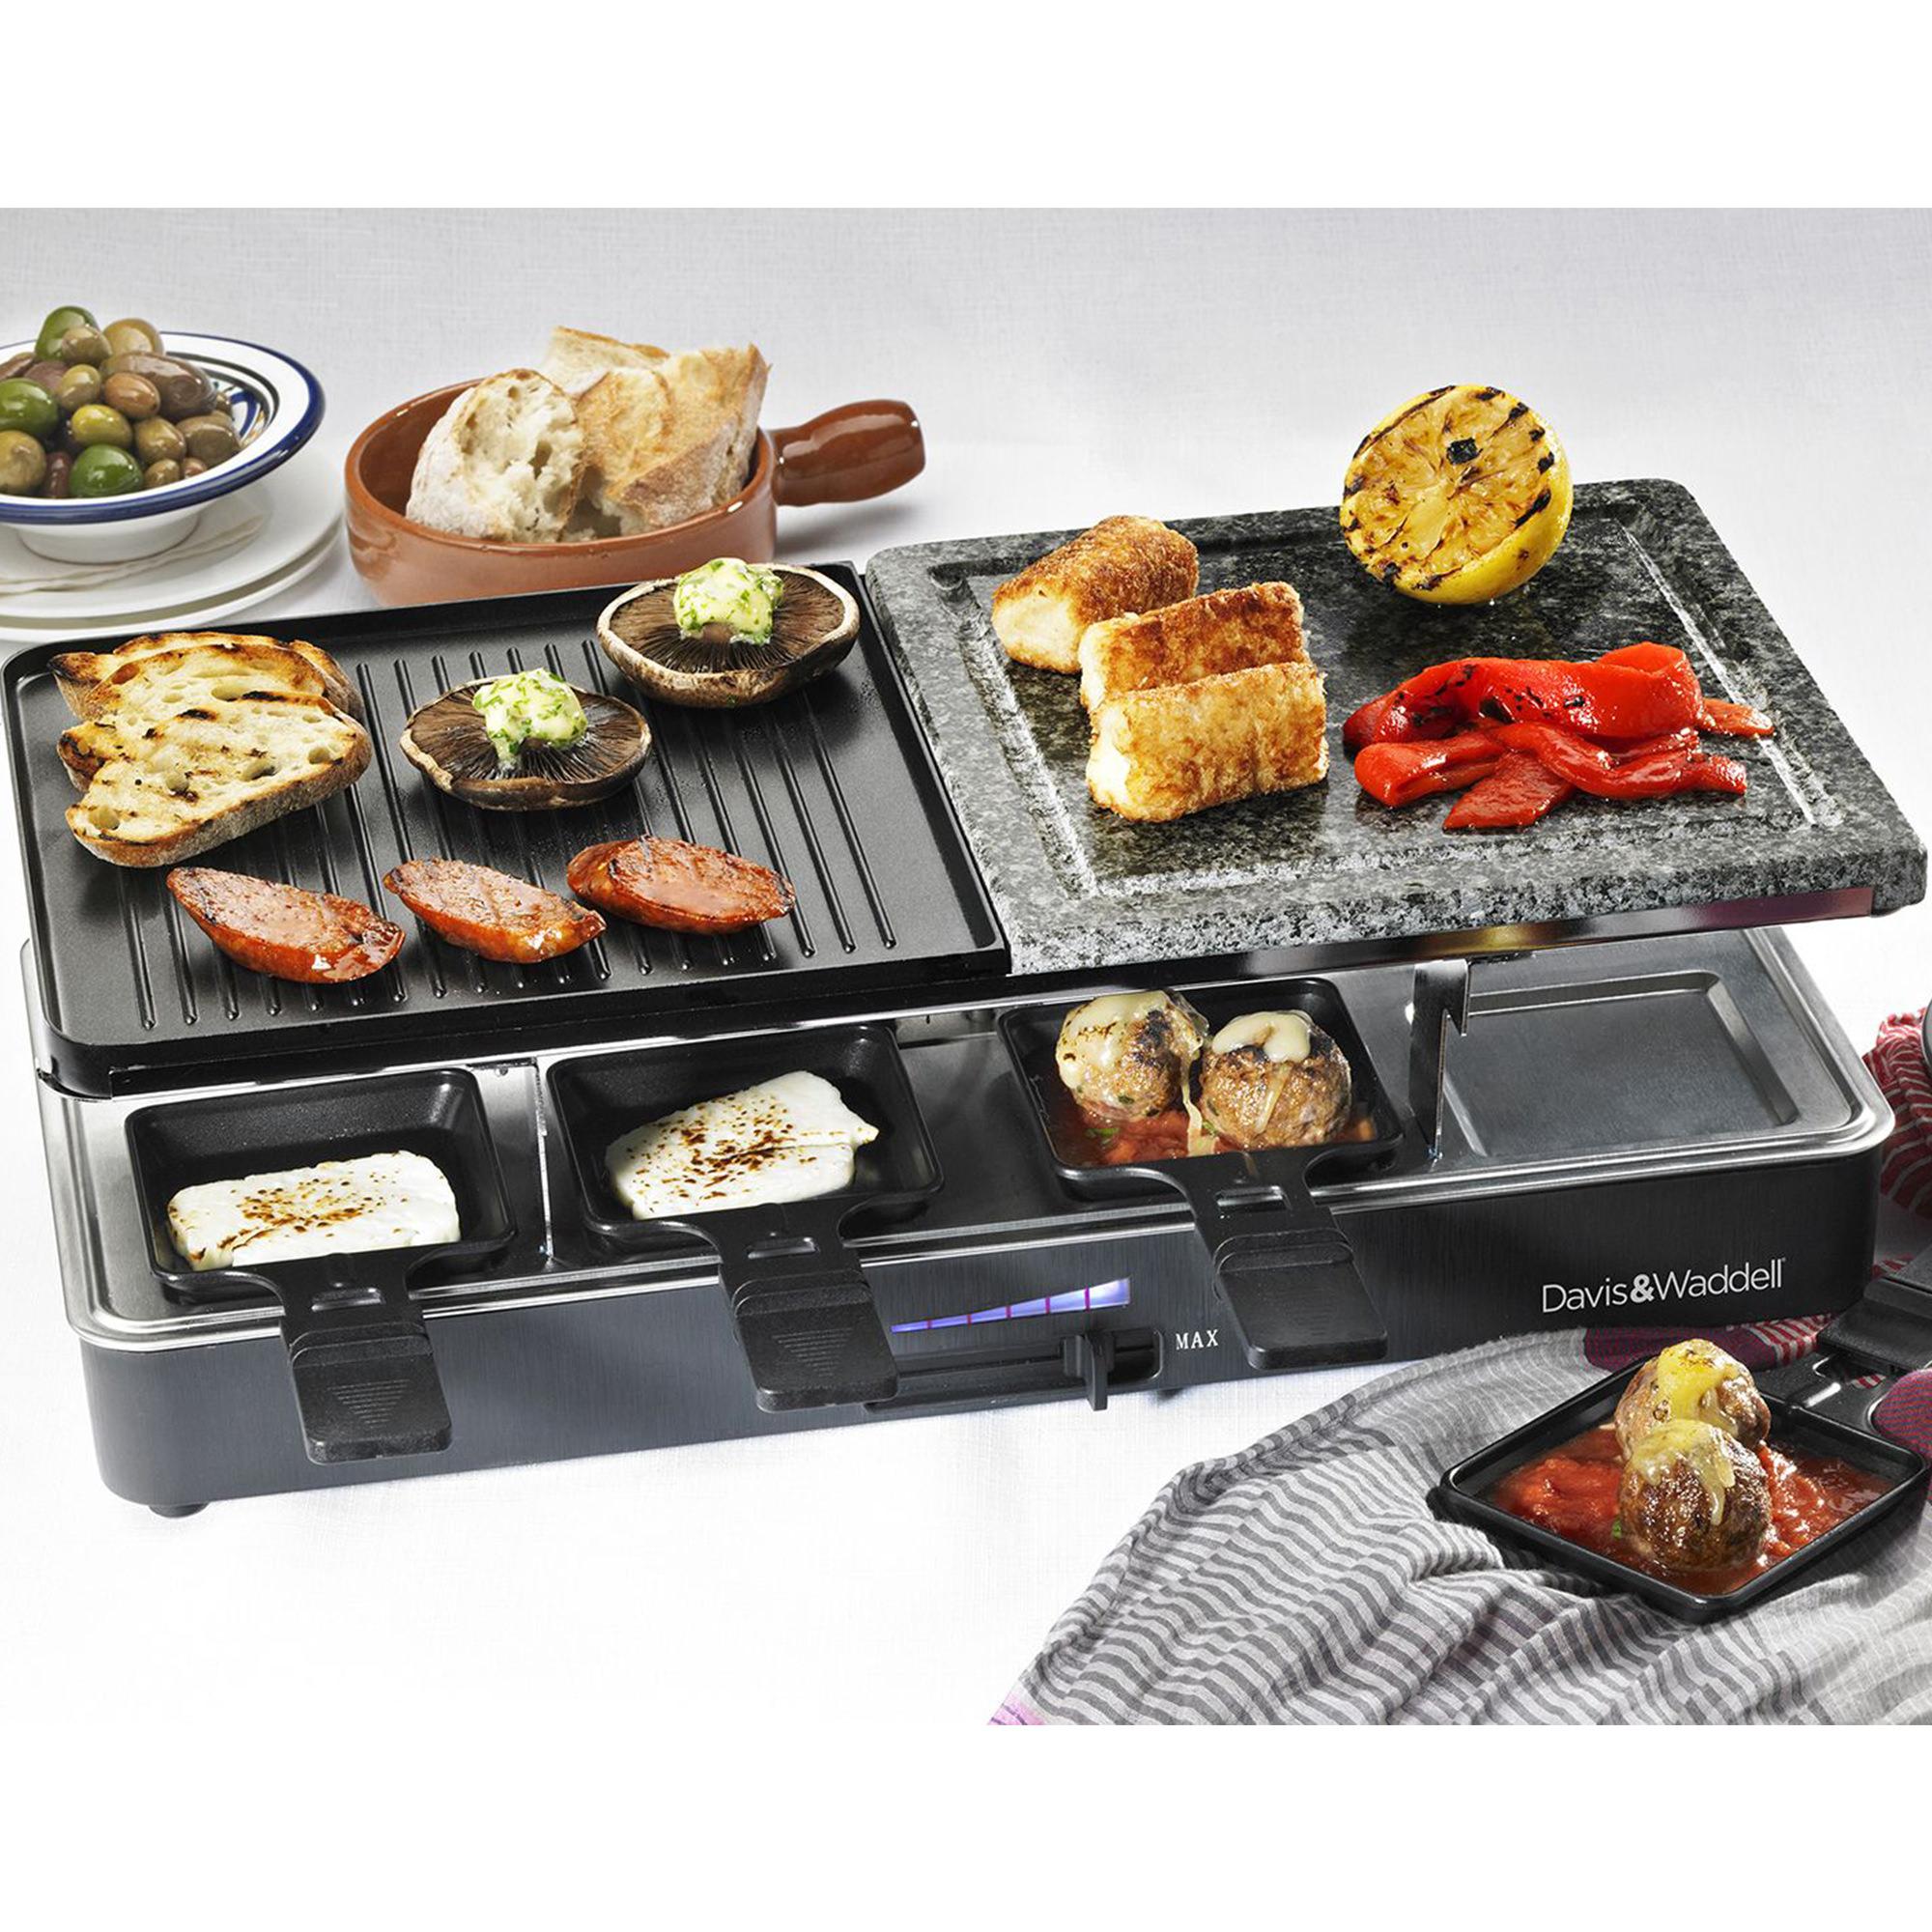 Davis & Waddell 8 Person Electric Party Grill and Raclette Black Image 3